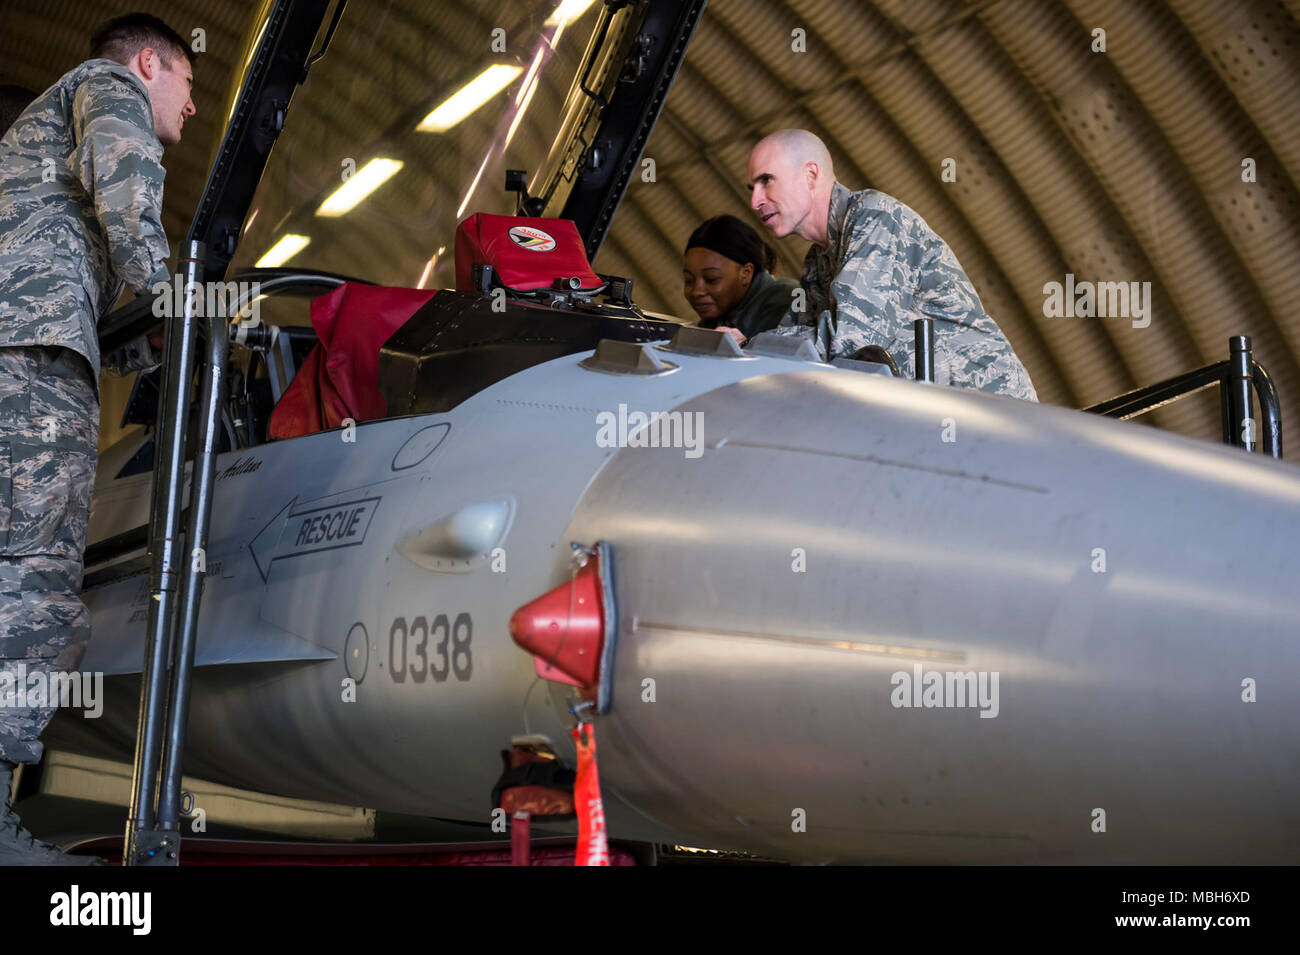 U.S. Air Force Col. Jason Bailey, 52nd Fighter Wing commander, explains the functions of an F-16 Fighting Falcon to Senior Airman Tyler MacMillan, (left), 52nd Logistics Readiness Squadron material handling equipment journeyman, and Airman 1st Class Leah Crawford, (right), 52nd LRS fleet management analyst journeyman, at Spangdahlem Air Base, Germany, April 4, 2018. The tour gave Airmen from around the 52nd FW the opportunity to meet the command team and expand their knowledge of flightline operations. Stock Photo